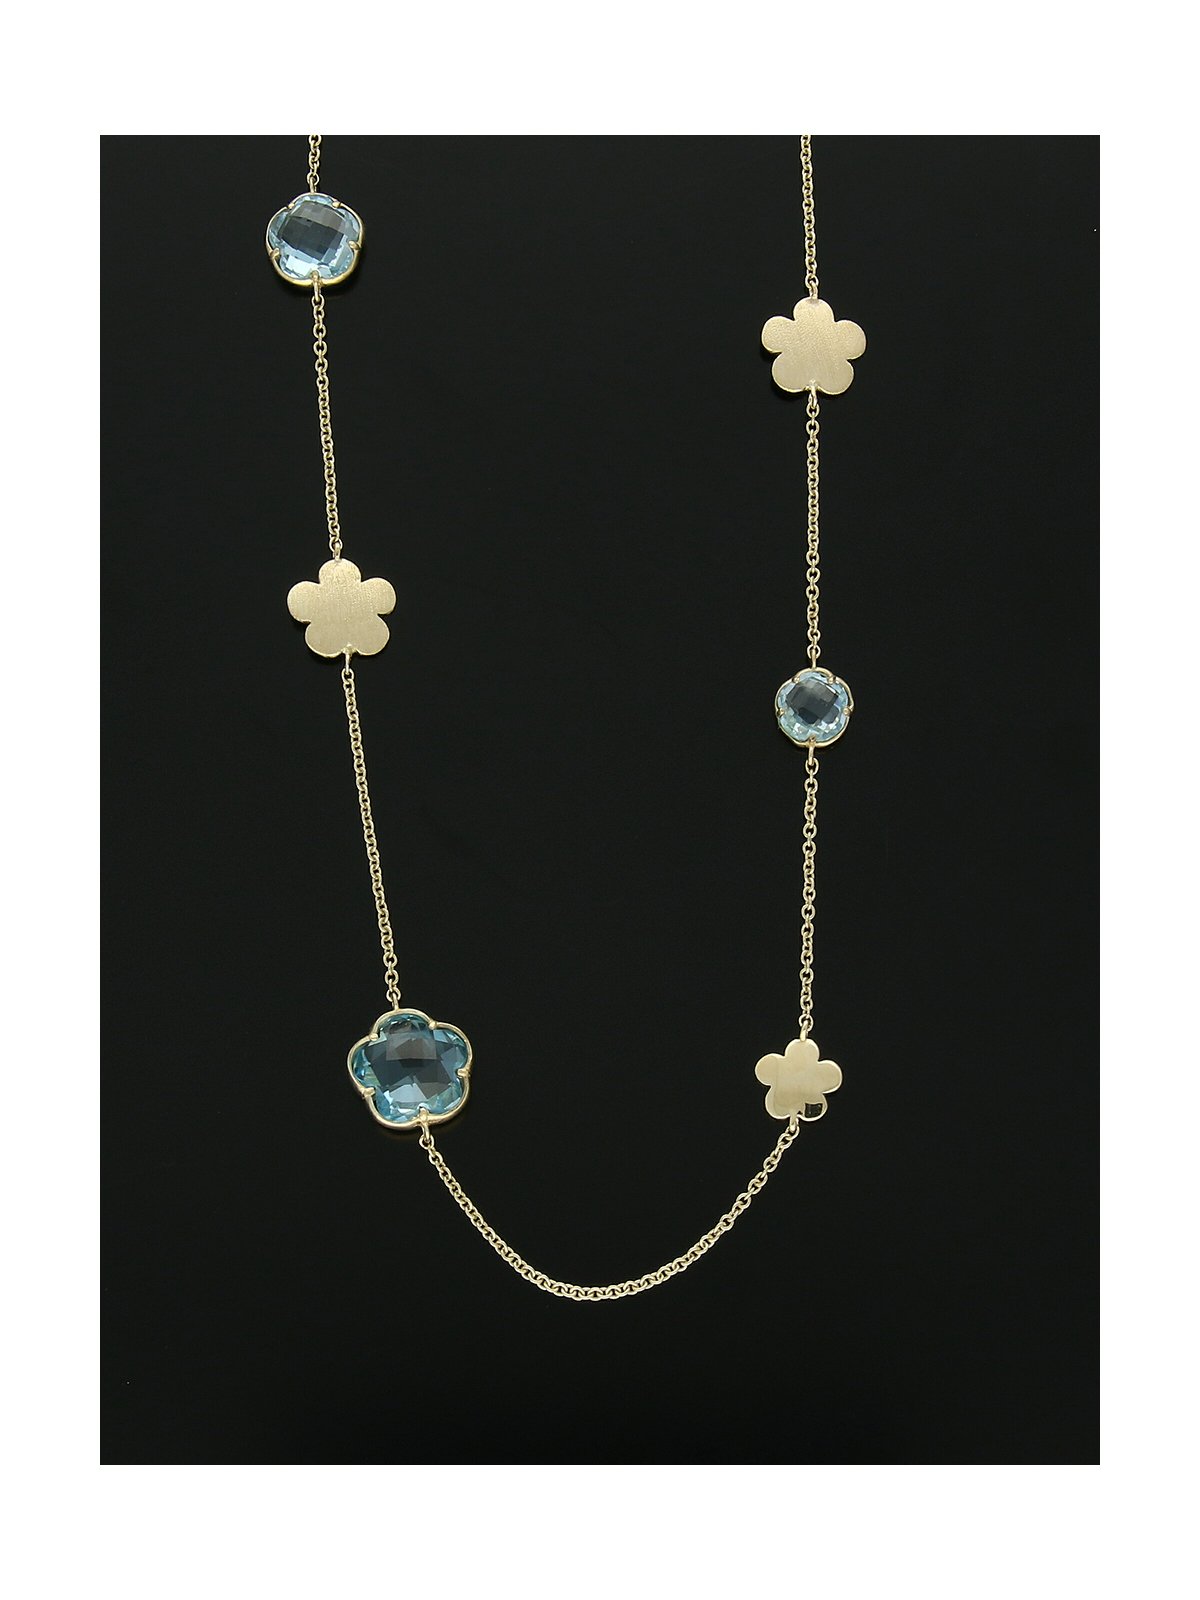 Blue Topaz Flower Necklace in 9ct Yellow Gold